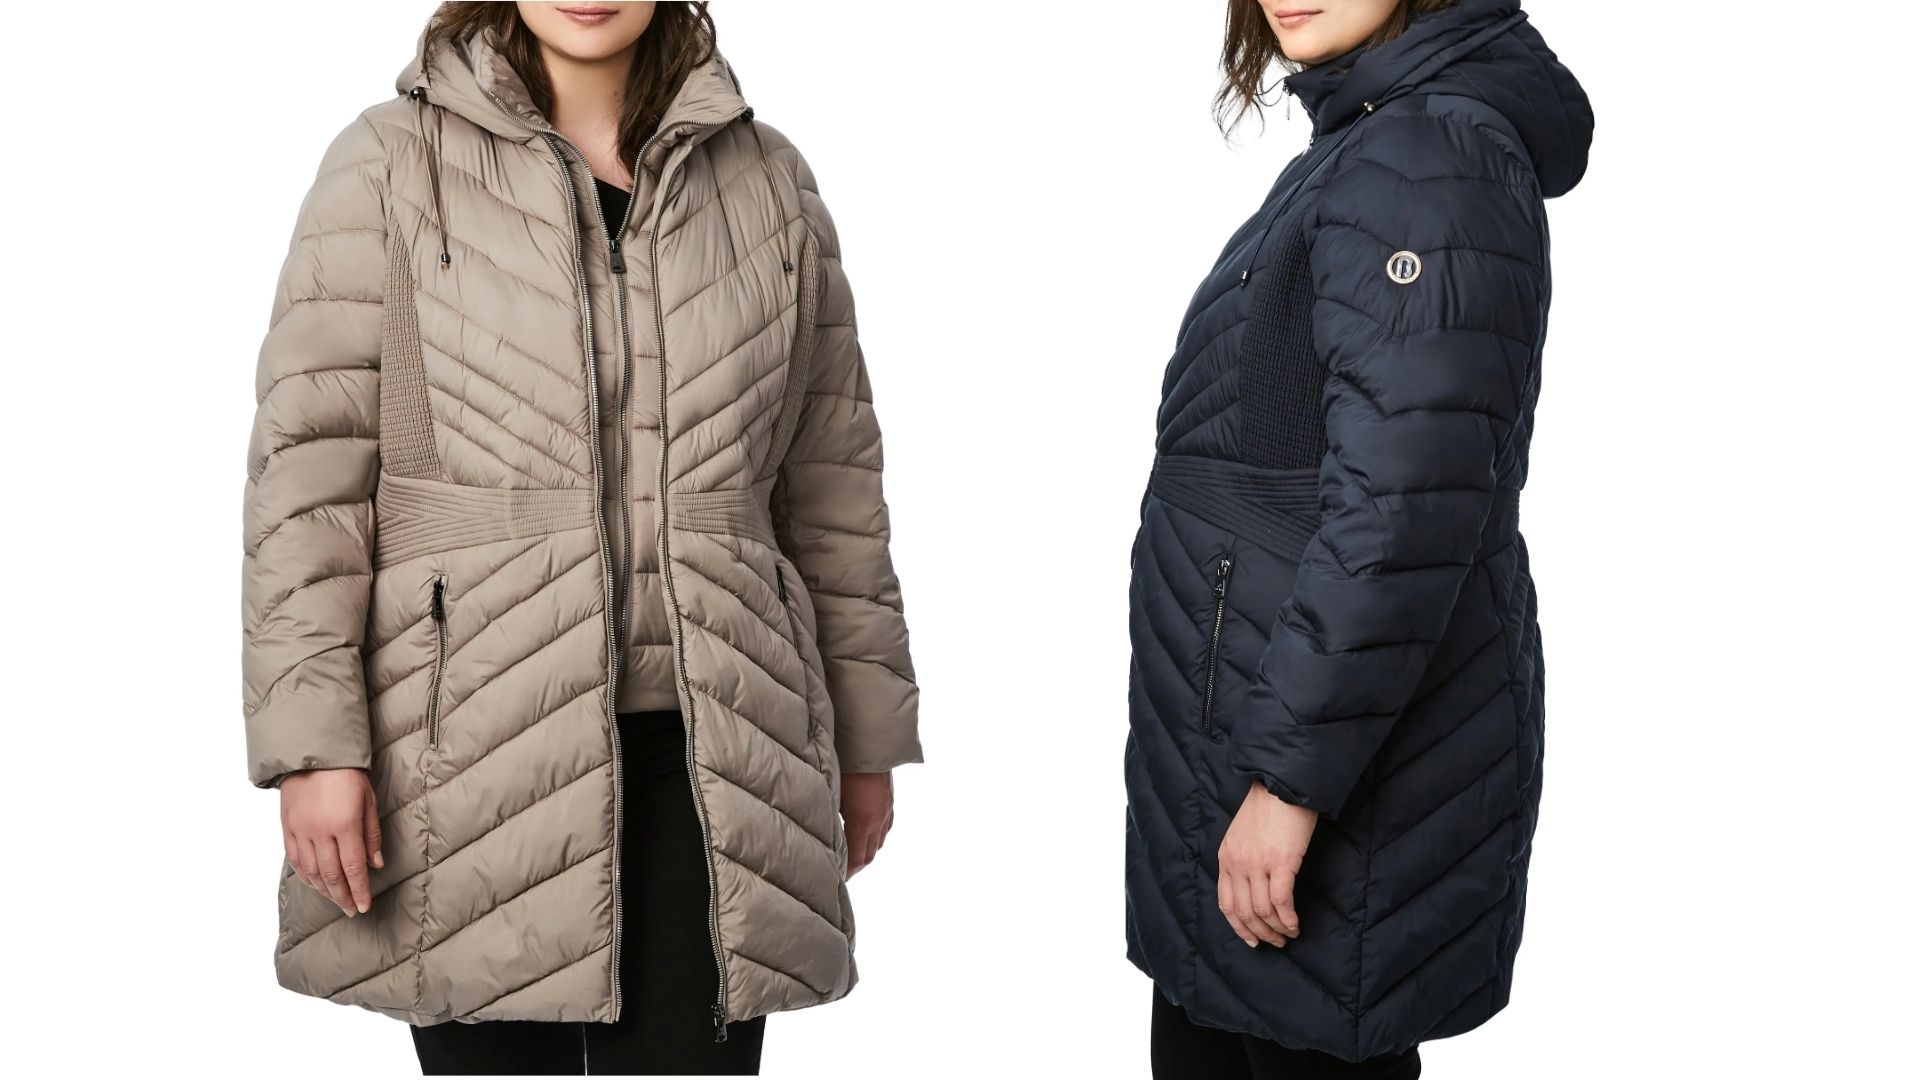 13 Best Plus Size Puffer Coats for Women of 2022 - Woman's World